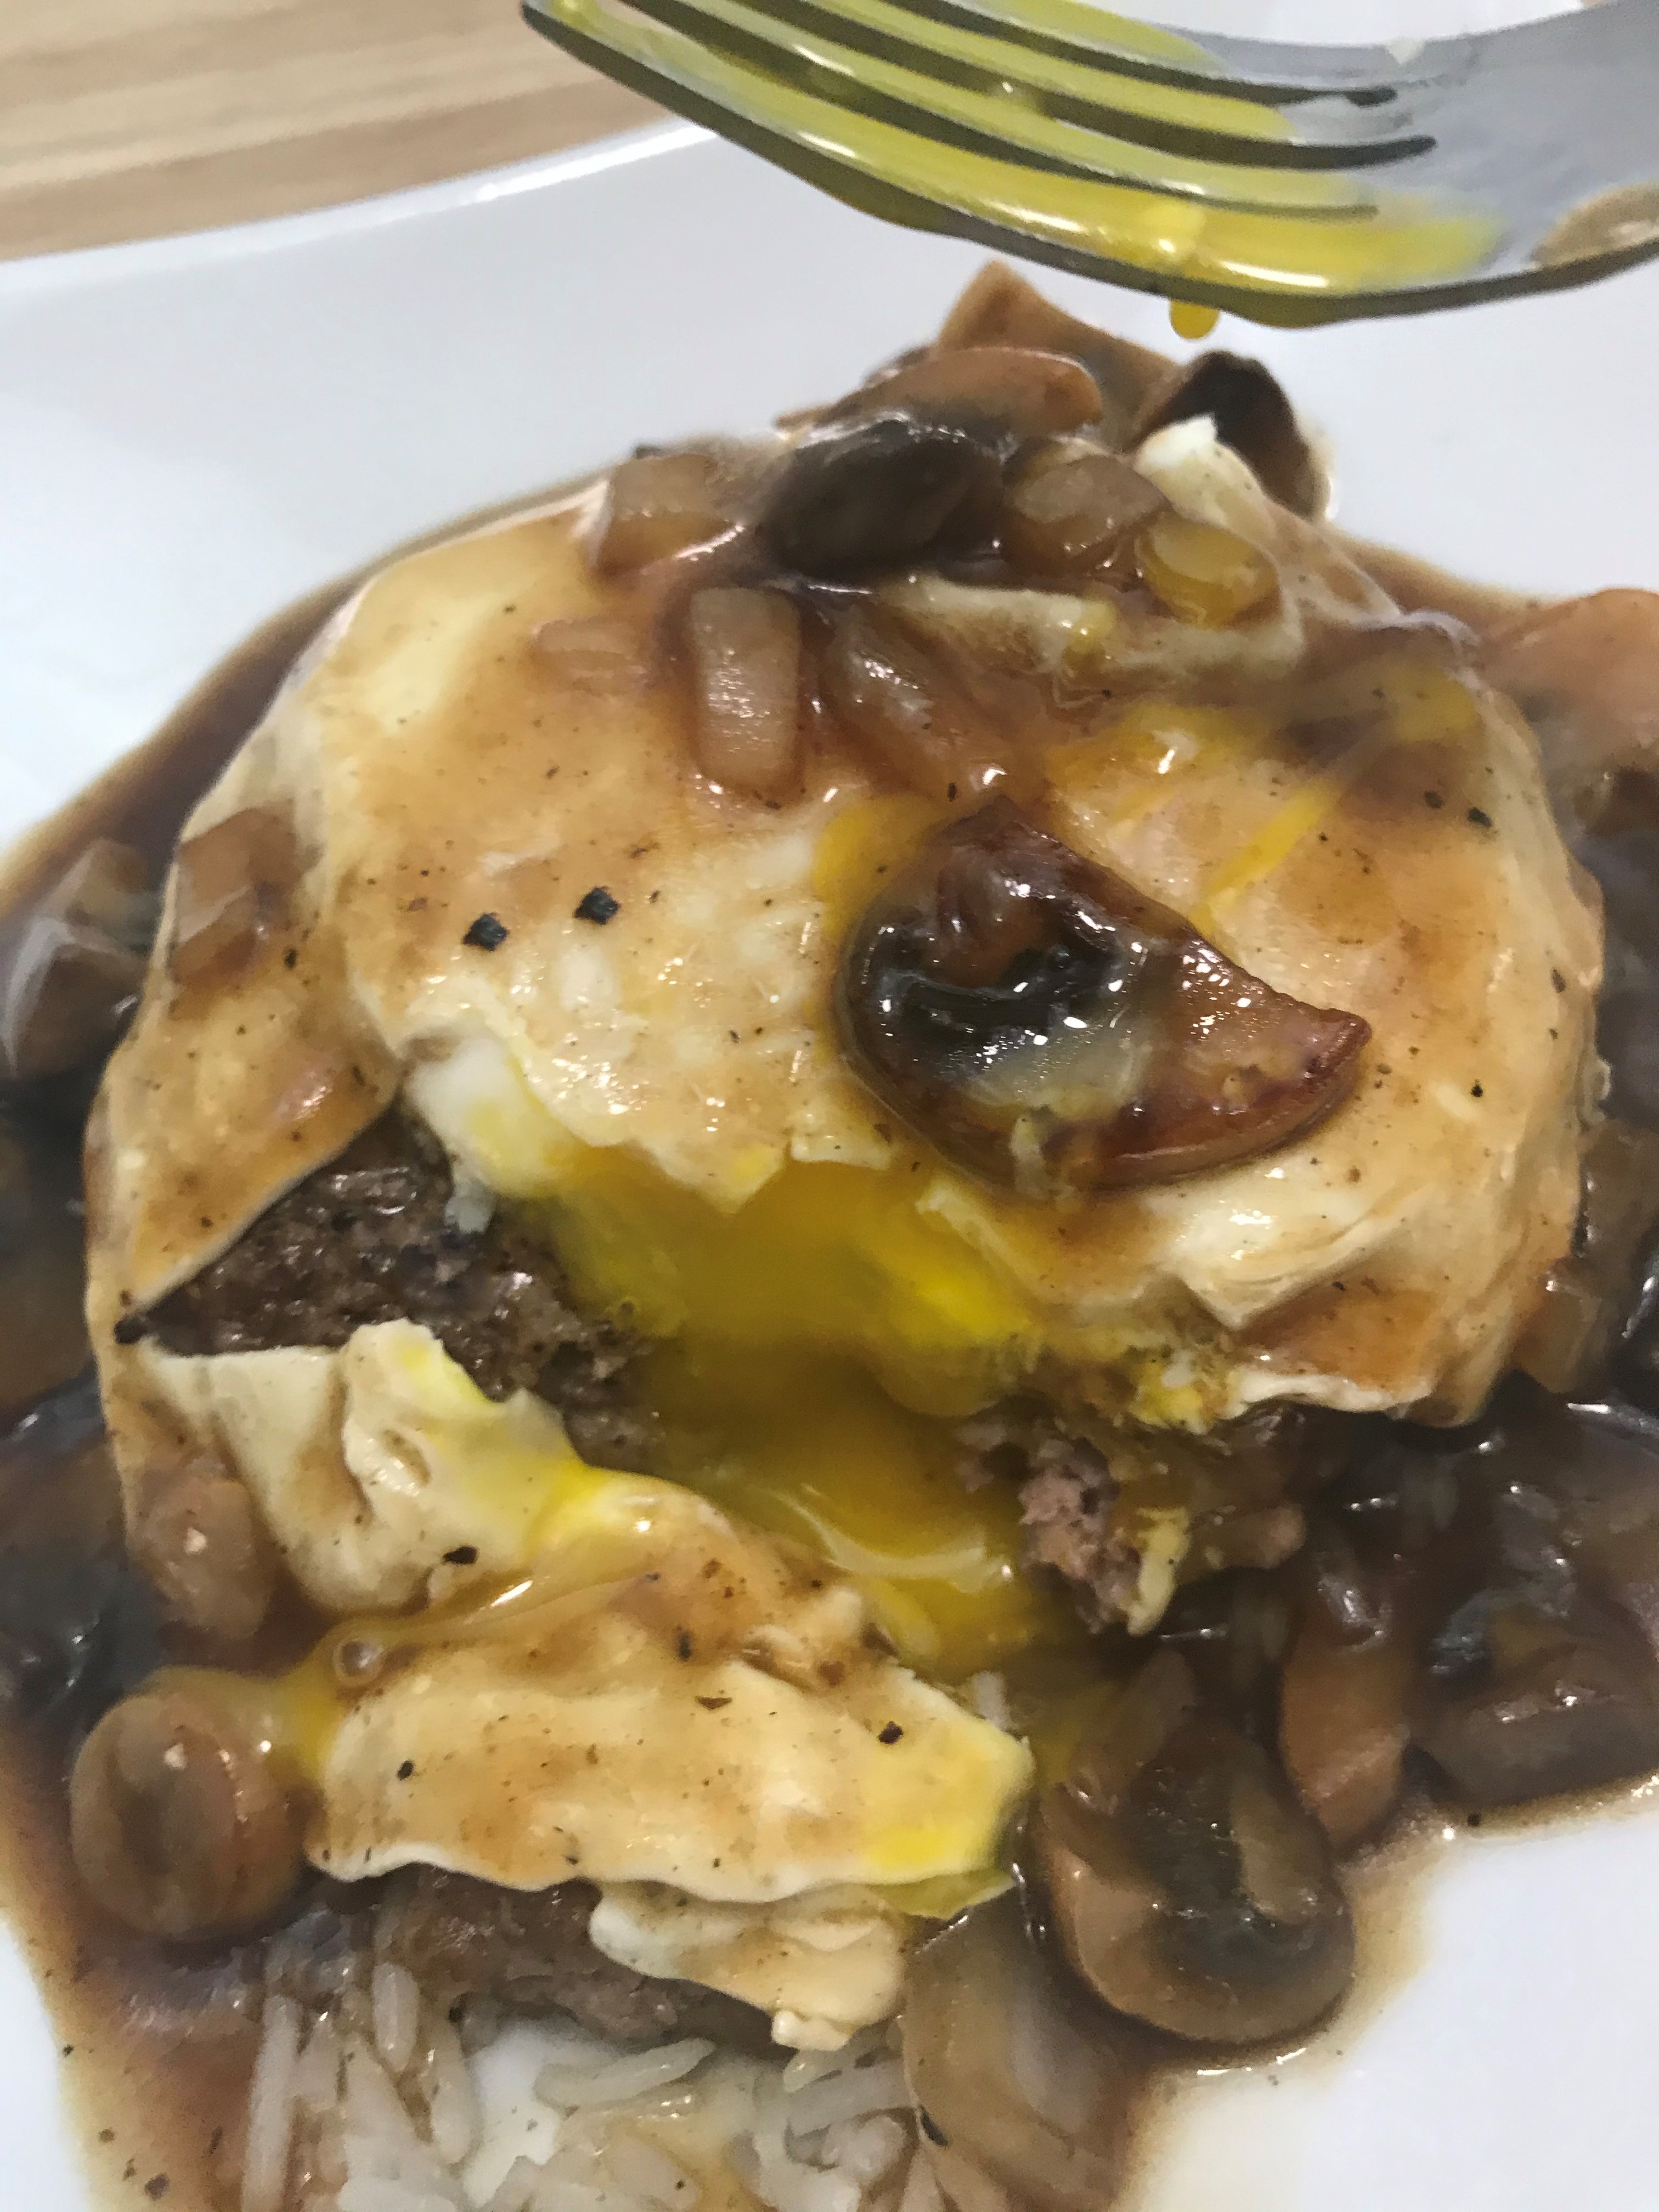 You are currently viewing Loco Moco with Mushroom Gravy